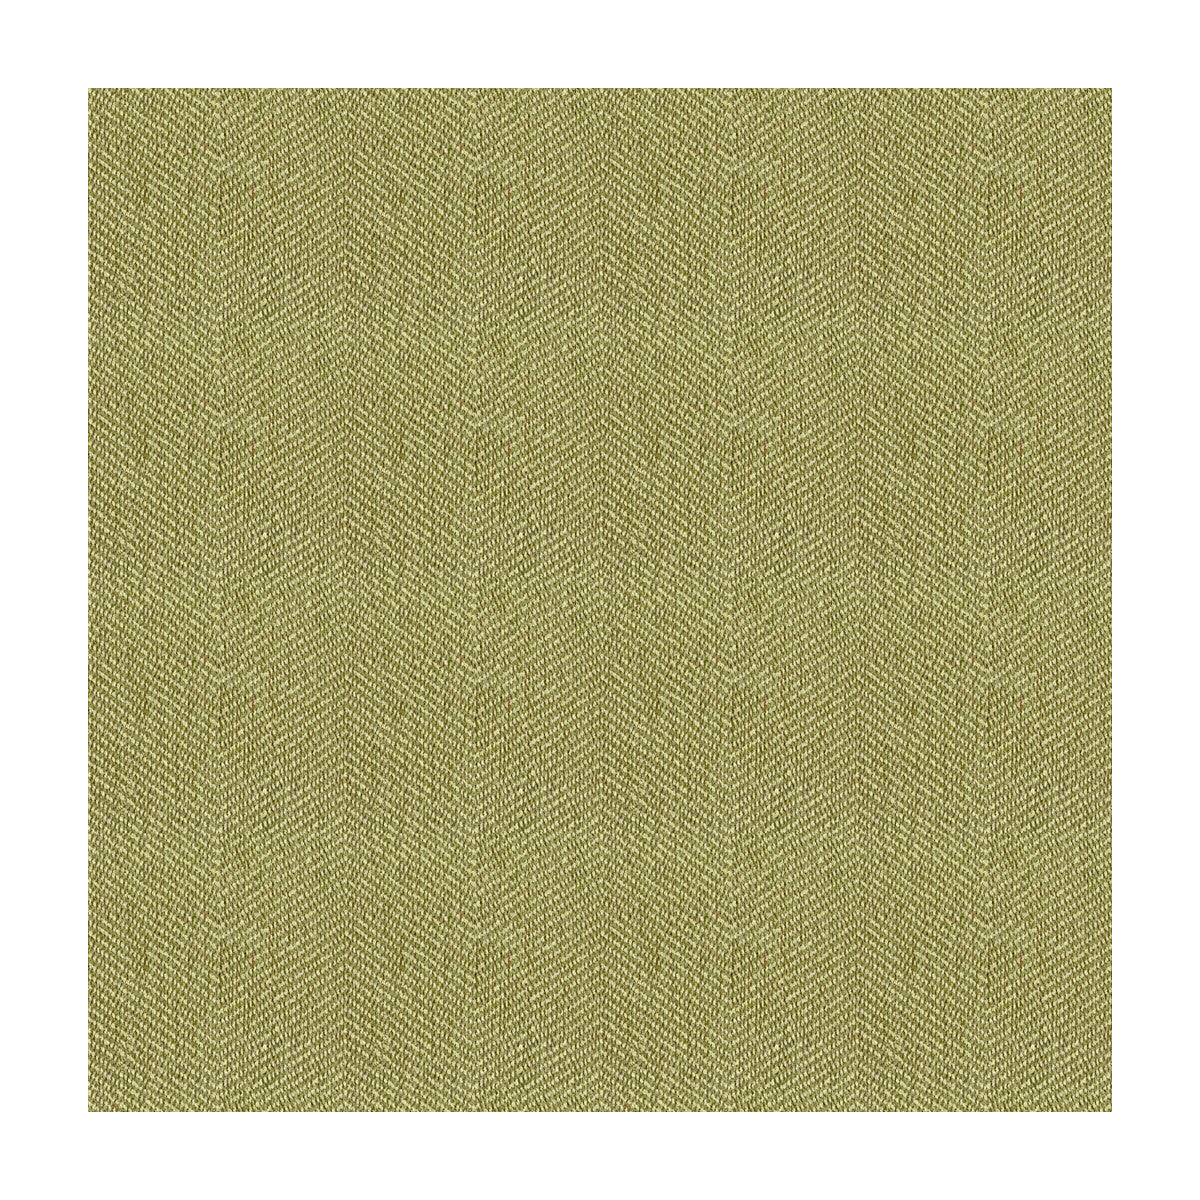 Kravet Smart fabric in 33832-3 color - pattern 33832.3.0 - by Kravet Smart in the Performance Crypton Home collection